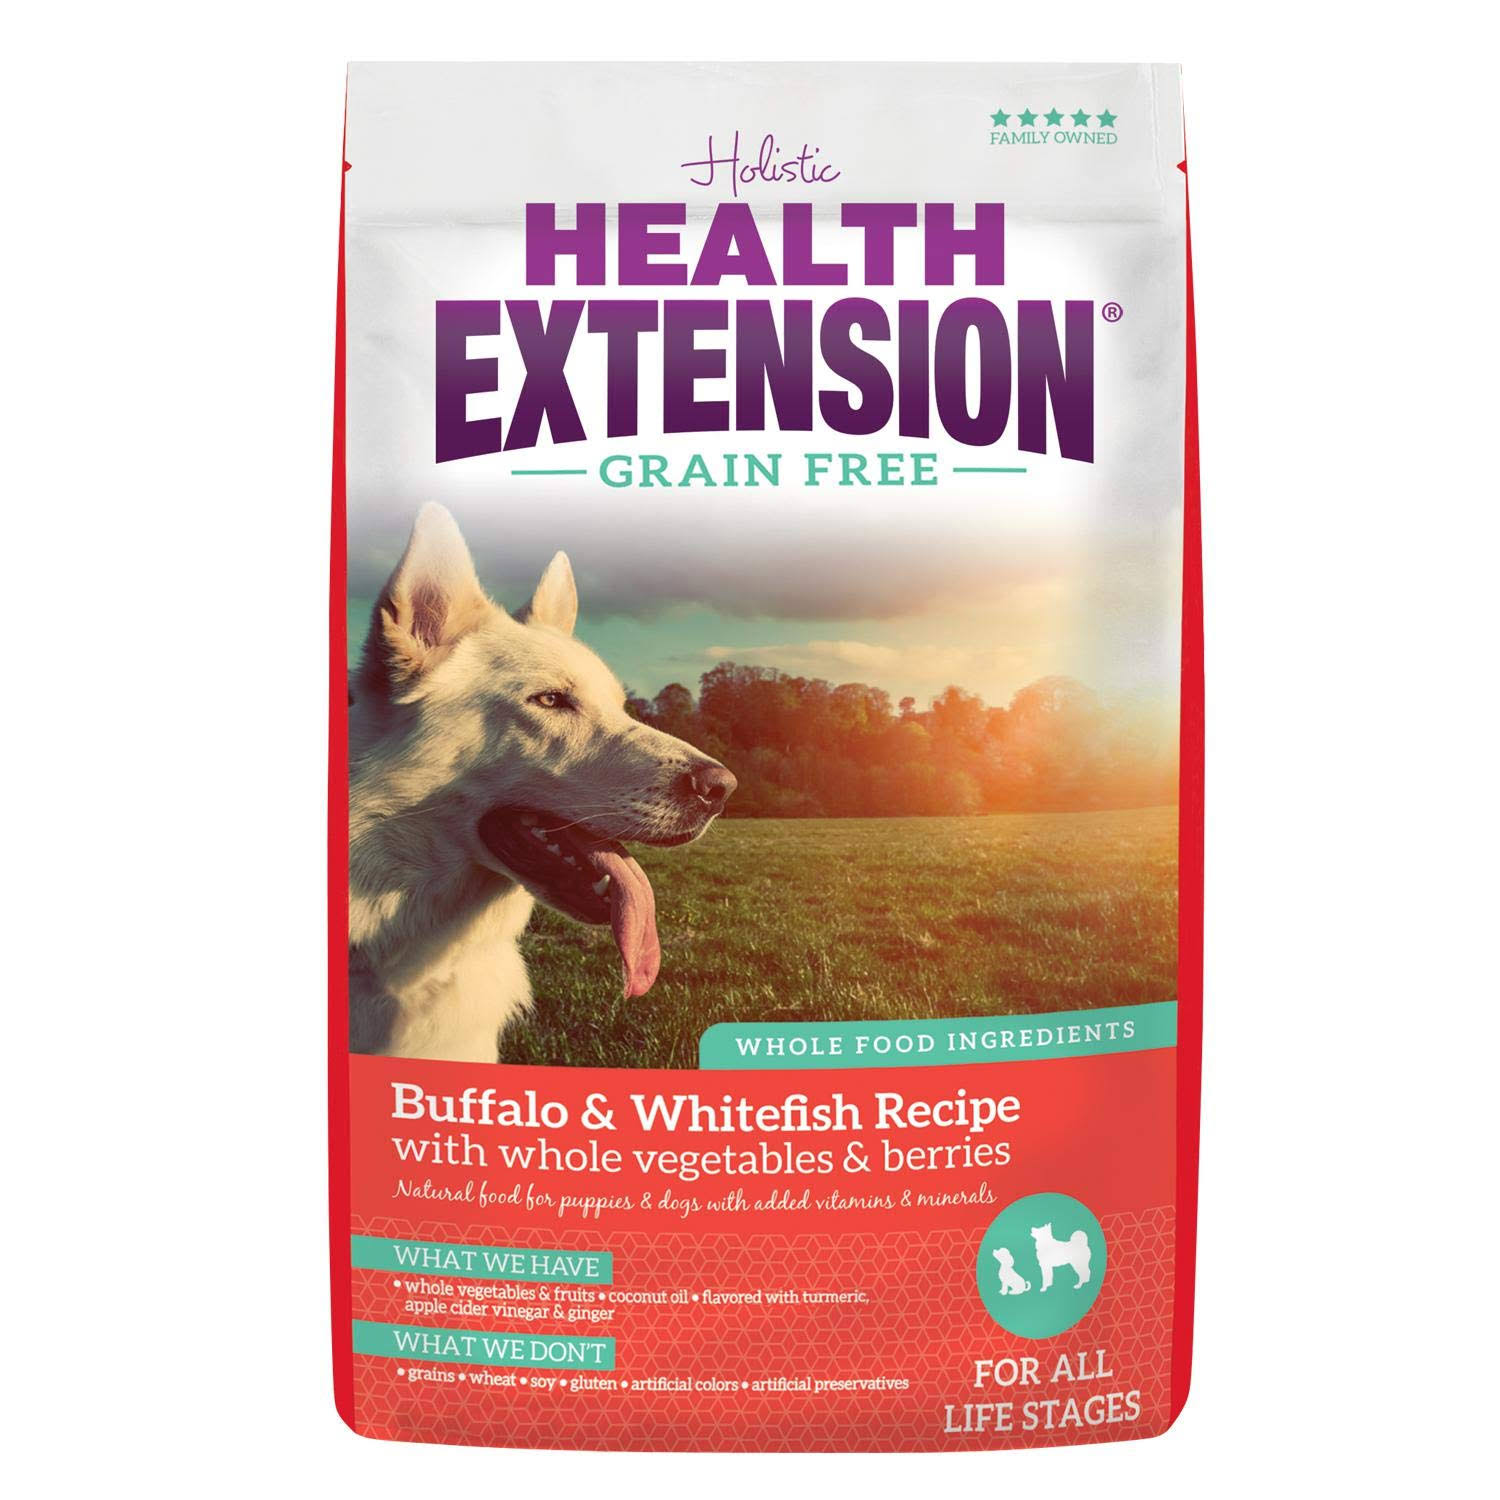 Health Extension Grain Free Little Bites Recipe Dry Dog Food - Buffalo and Whitefish, 1lb